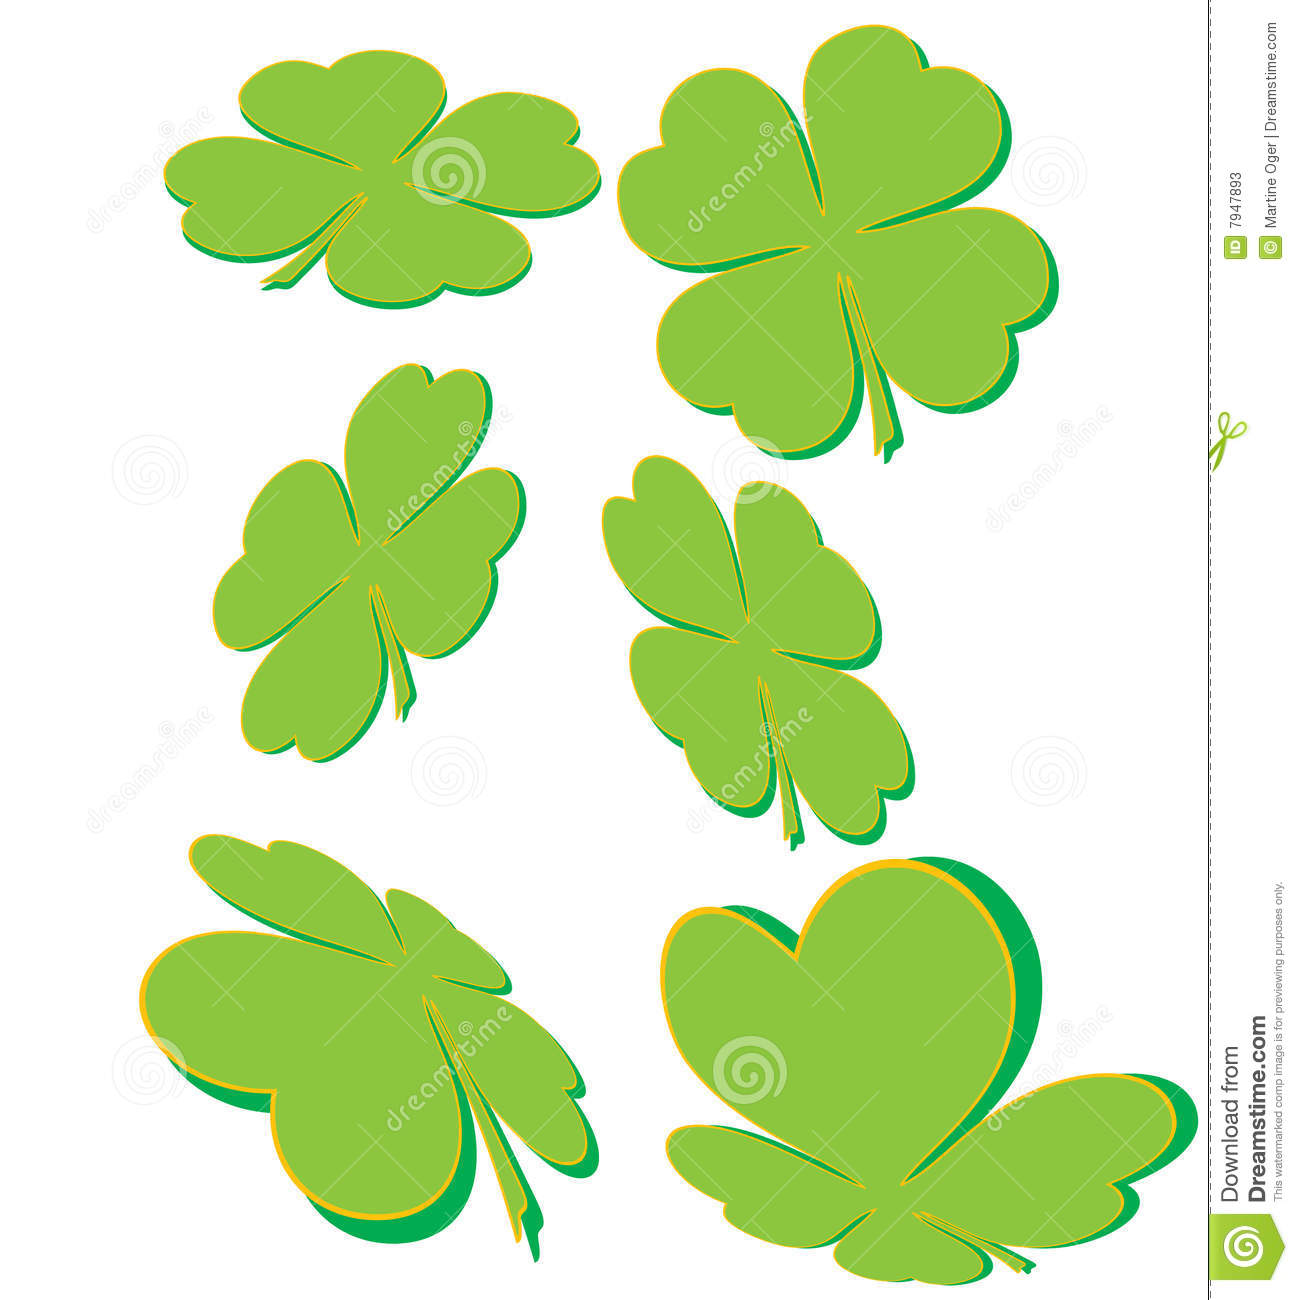 Clover Shapes Stock Photos   Image  7947893